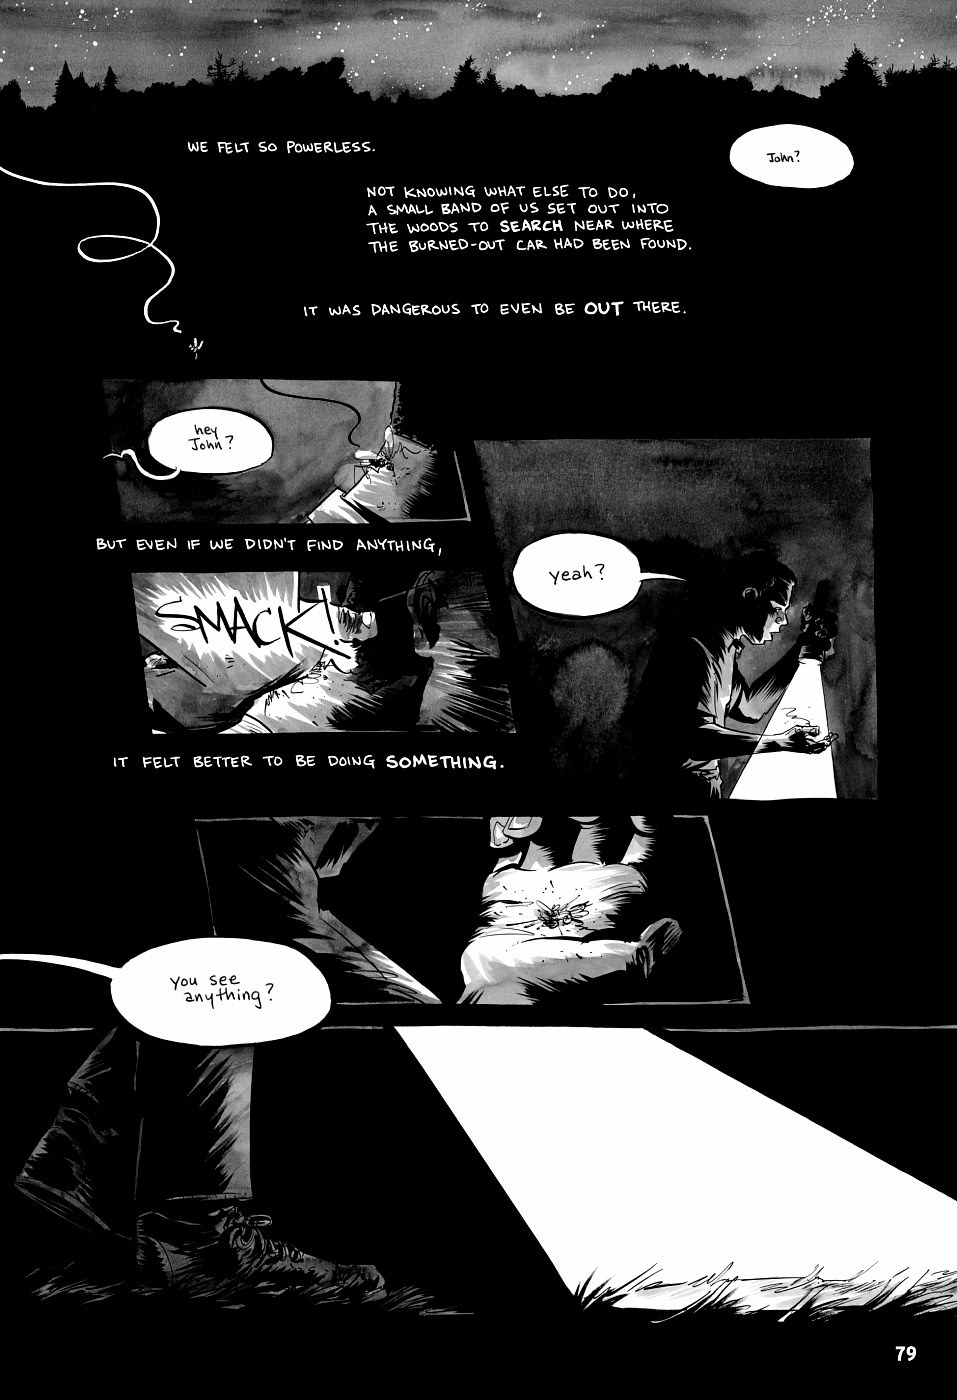 page 79 of march book three graphic novel